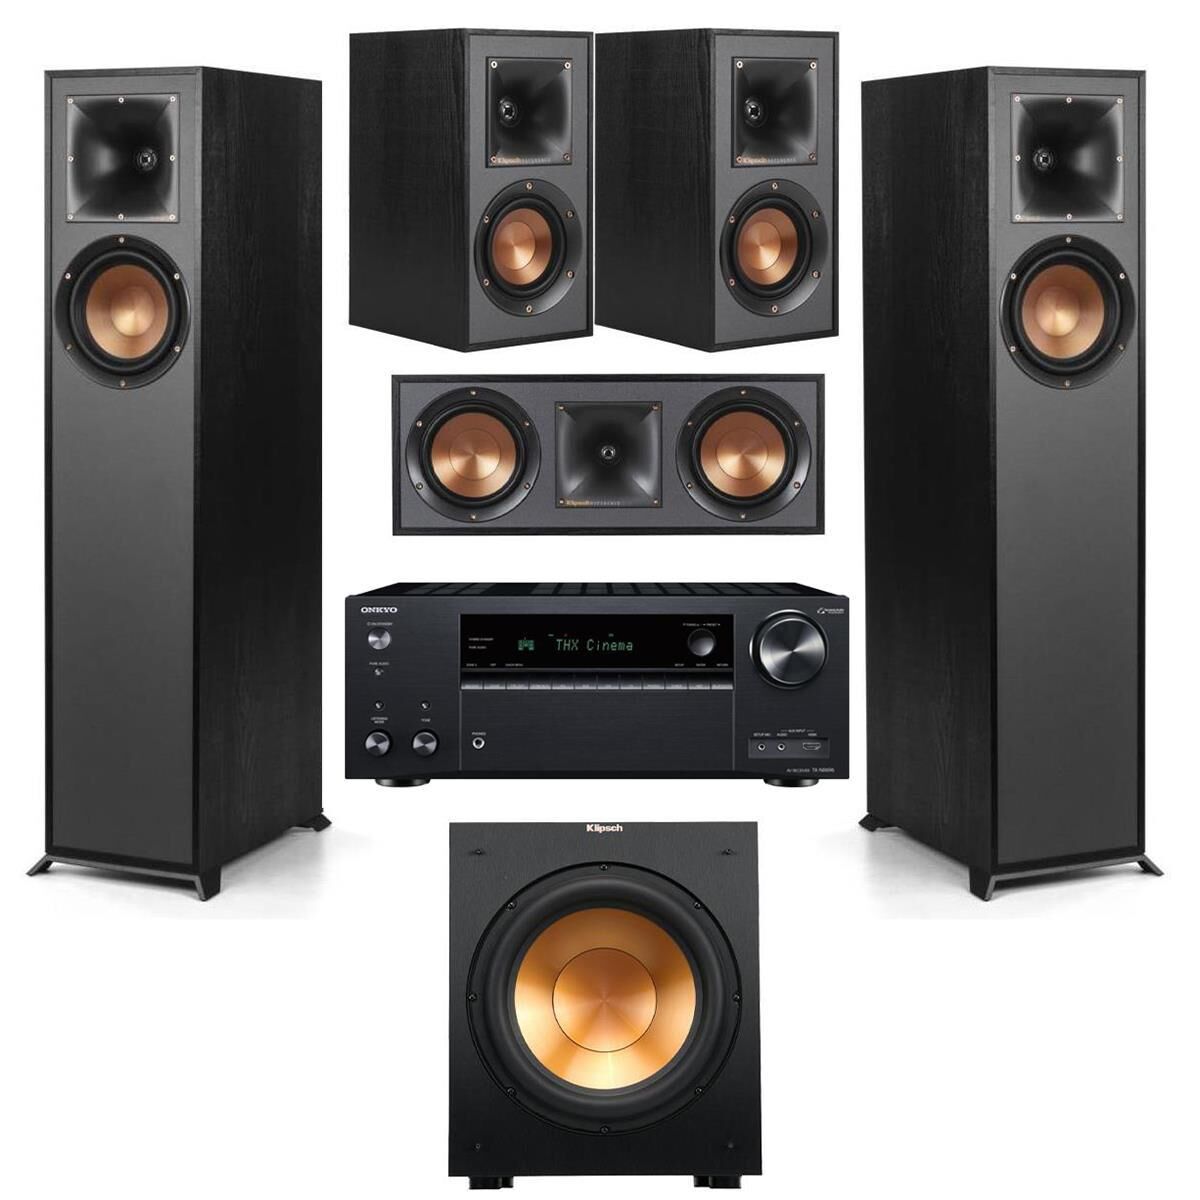 Klipsch Reference R-610F 5.1 Home Theater System with Onkyo TX-NR696 7.2-Channel